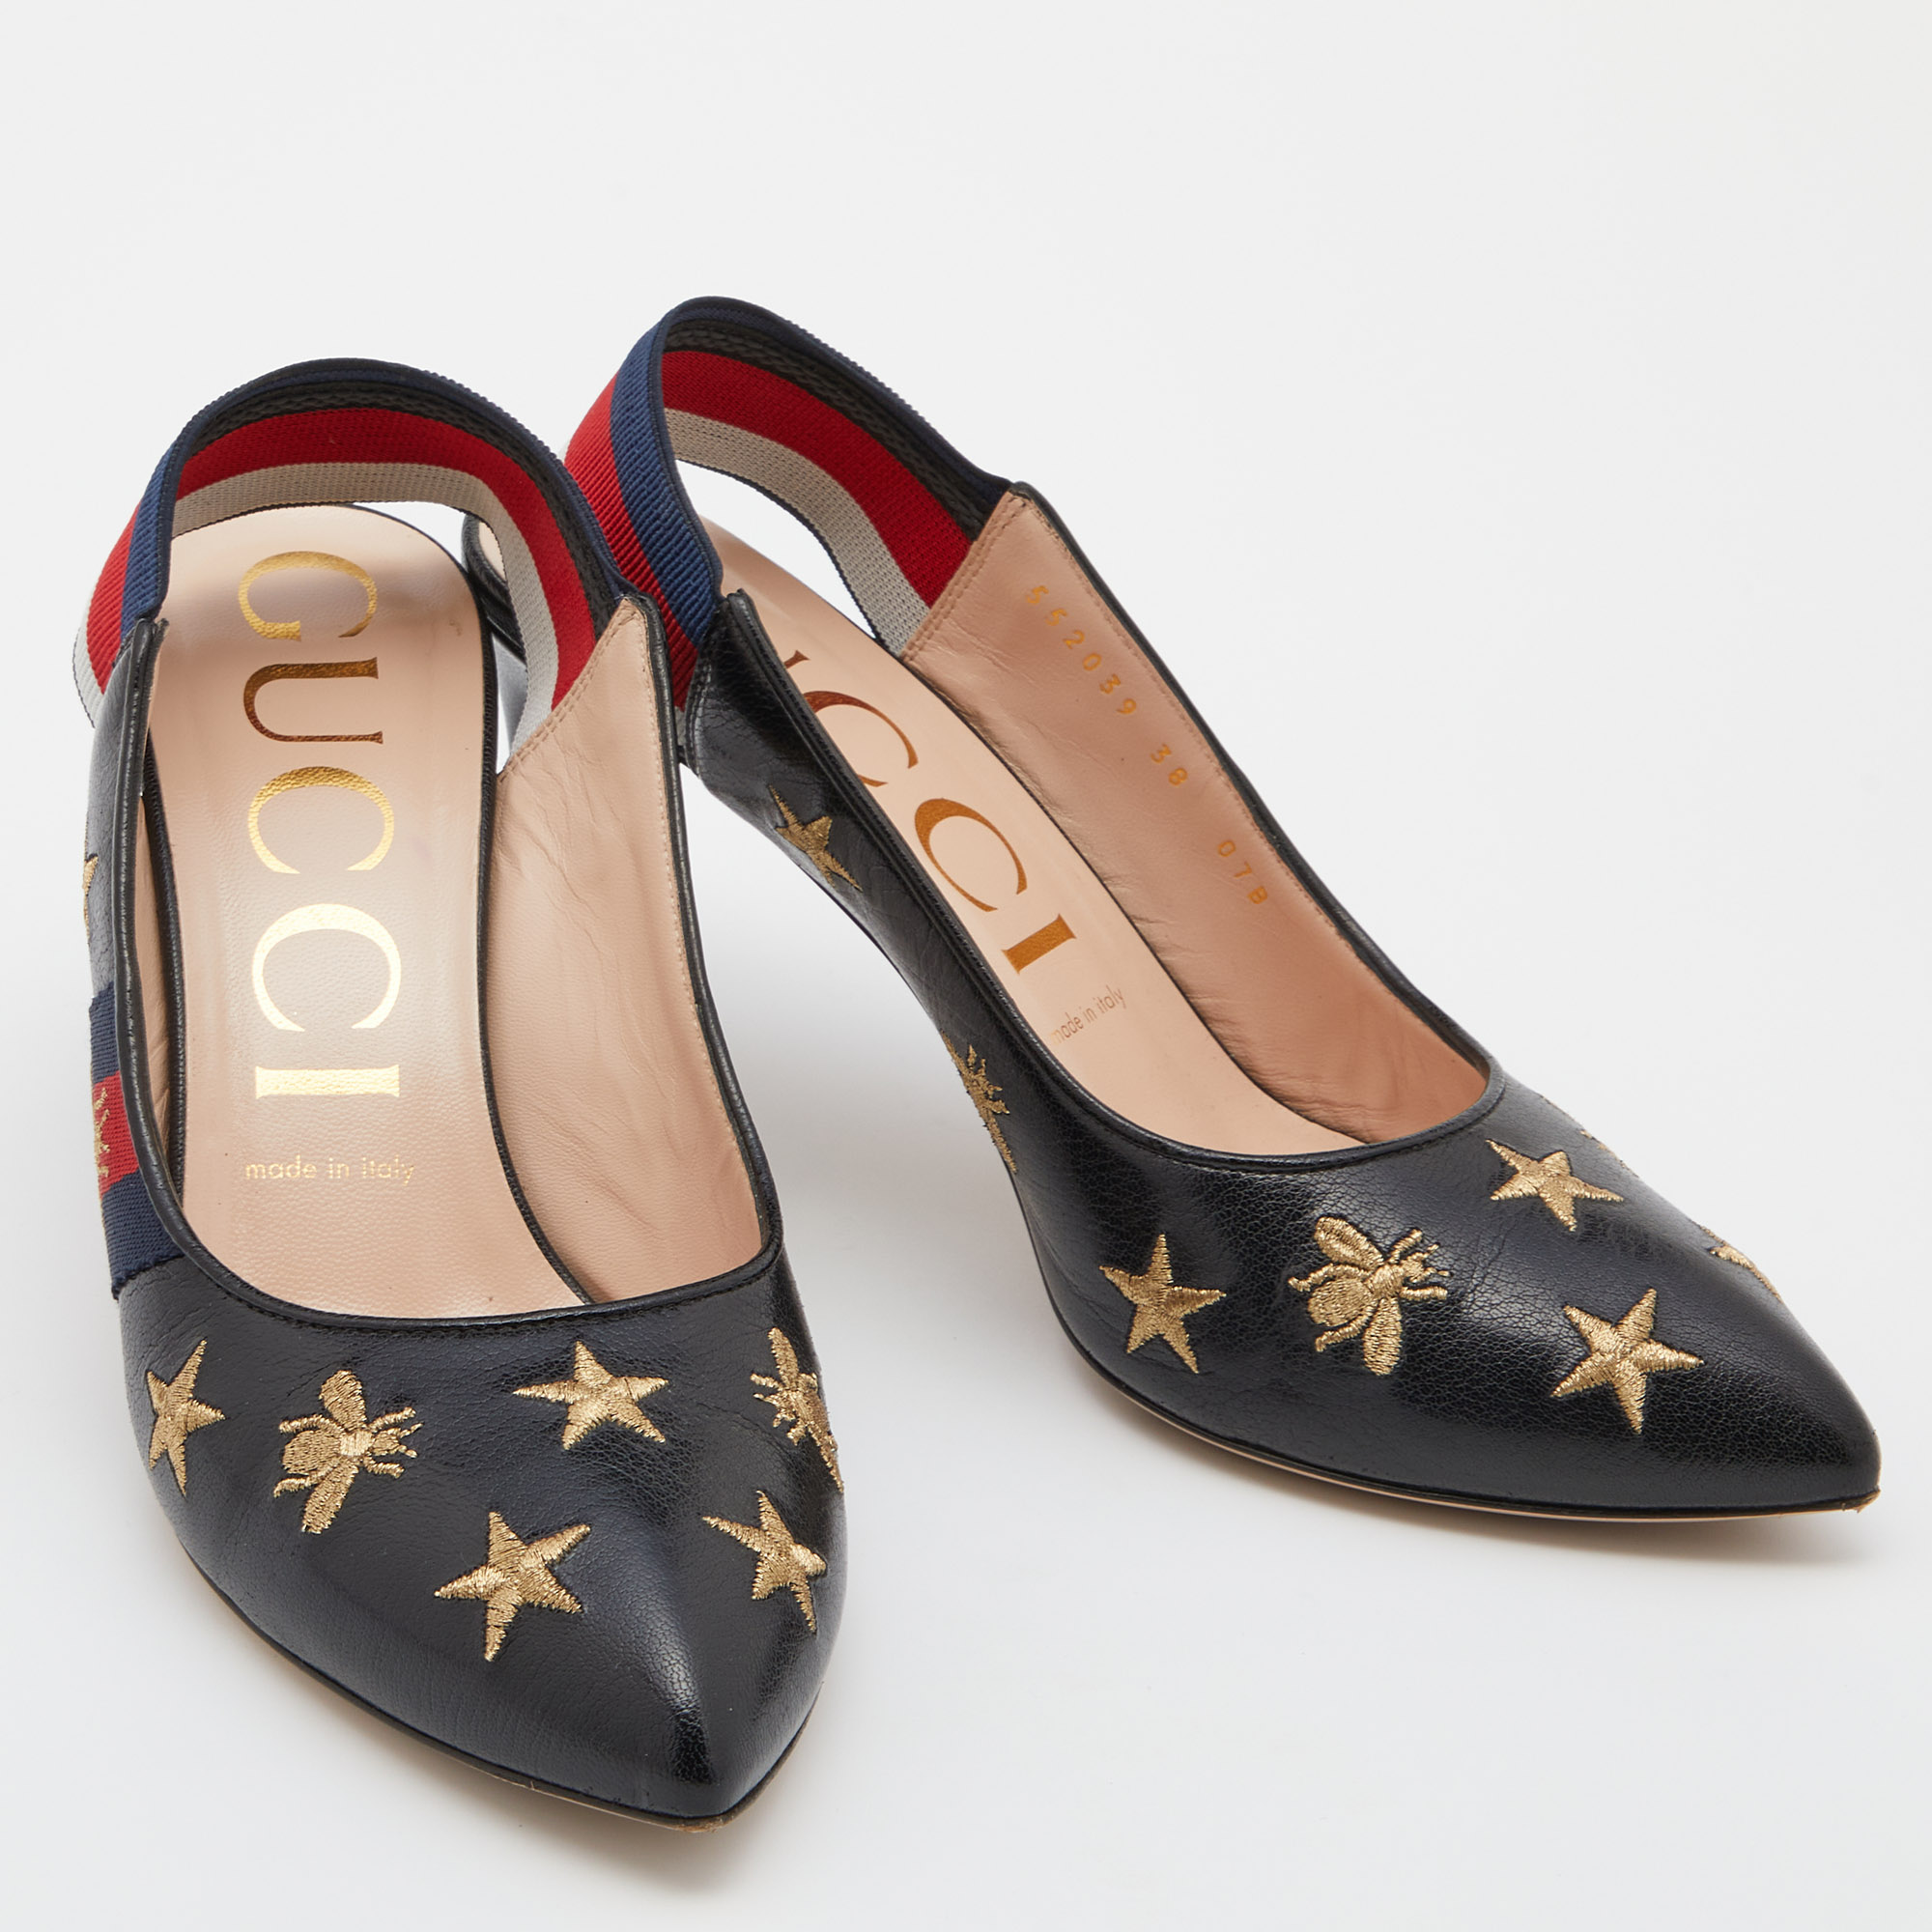 Gucci Black Bee Star Embroidered Leather Web Sylvie Slingback Pumps Size 38